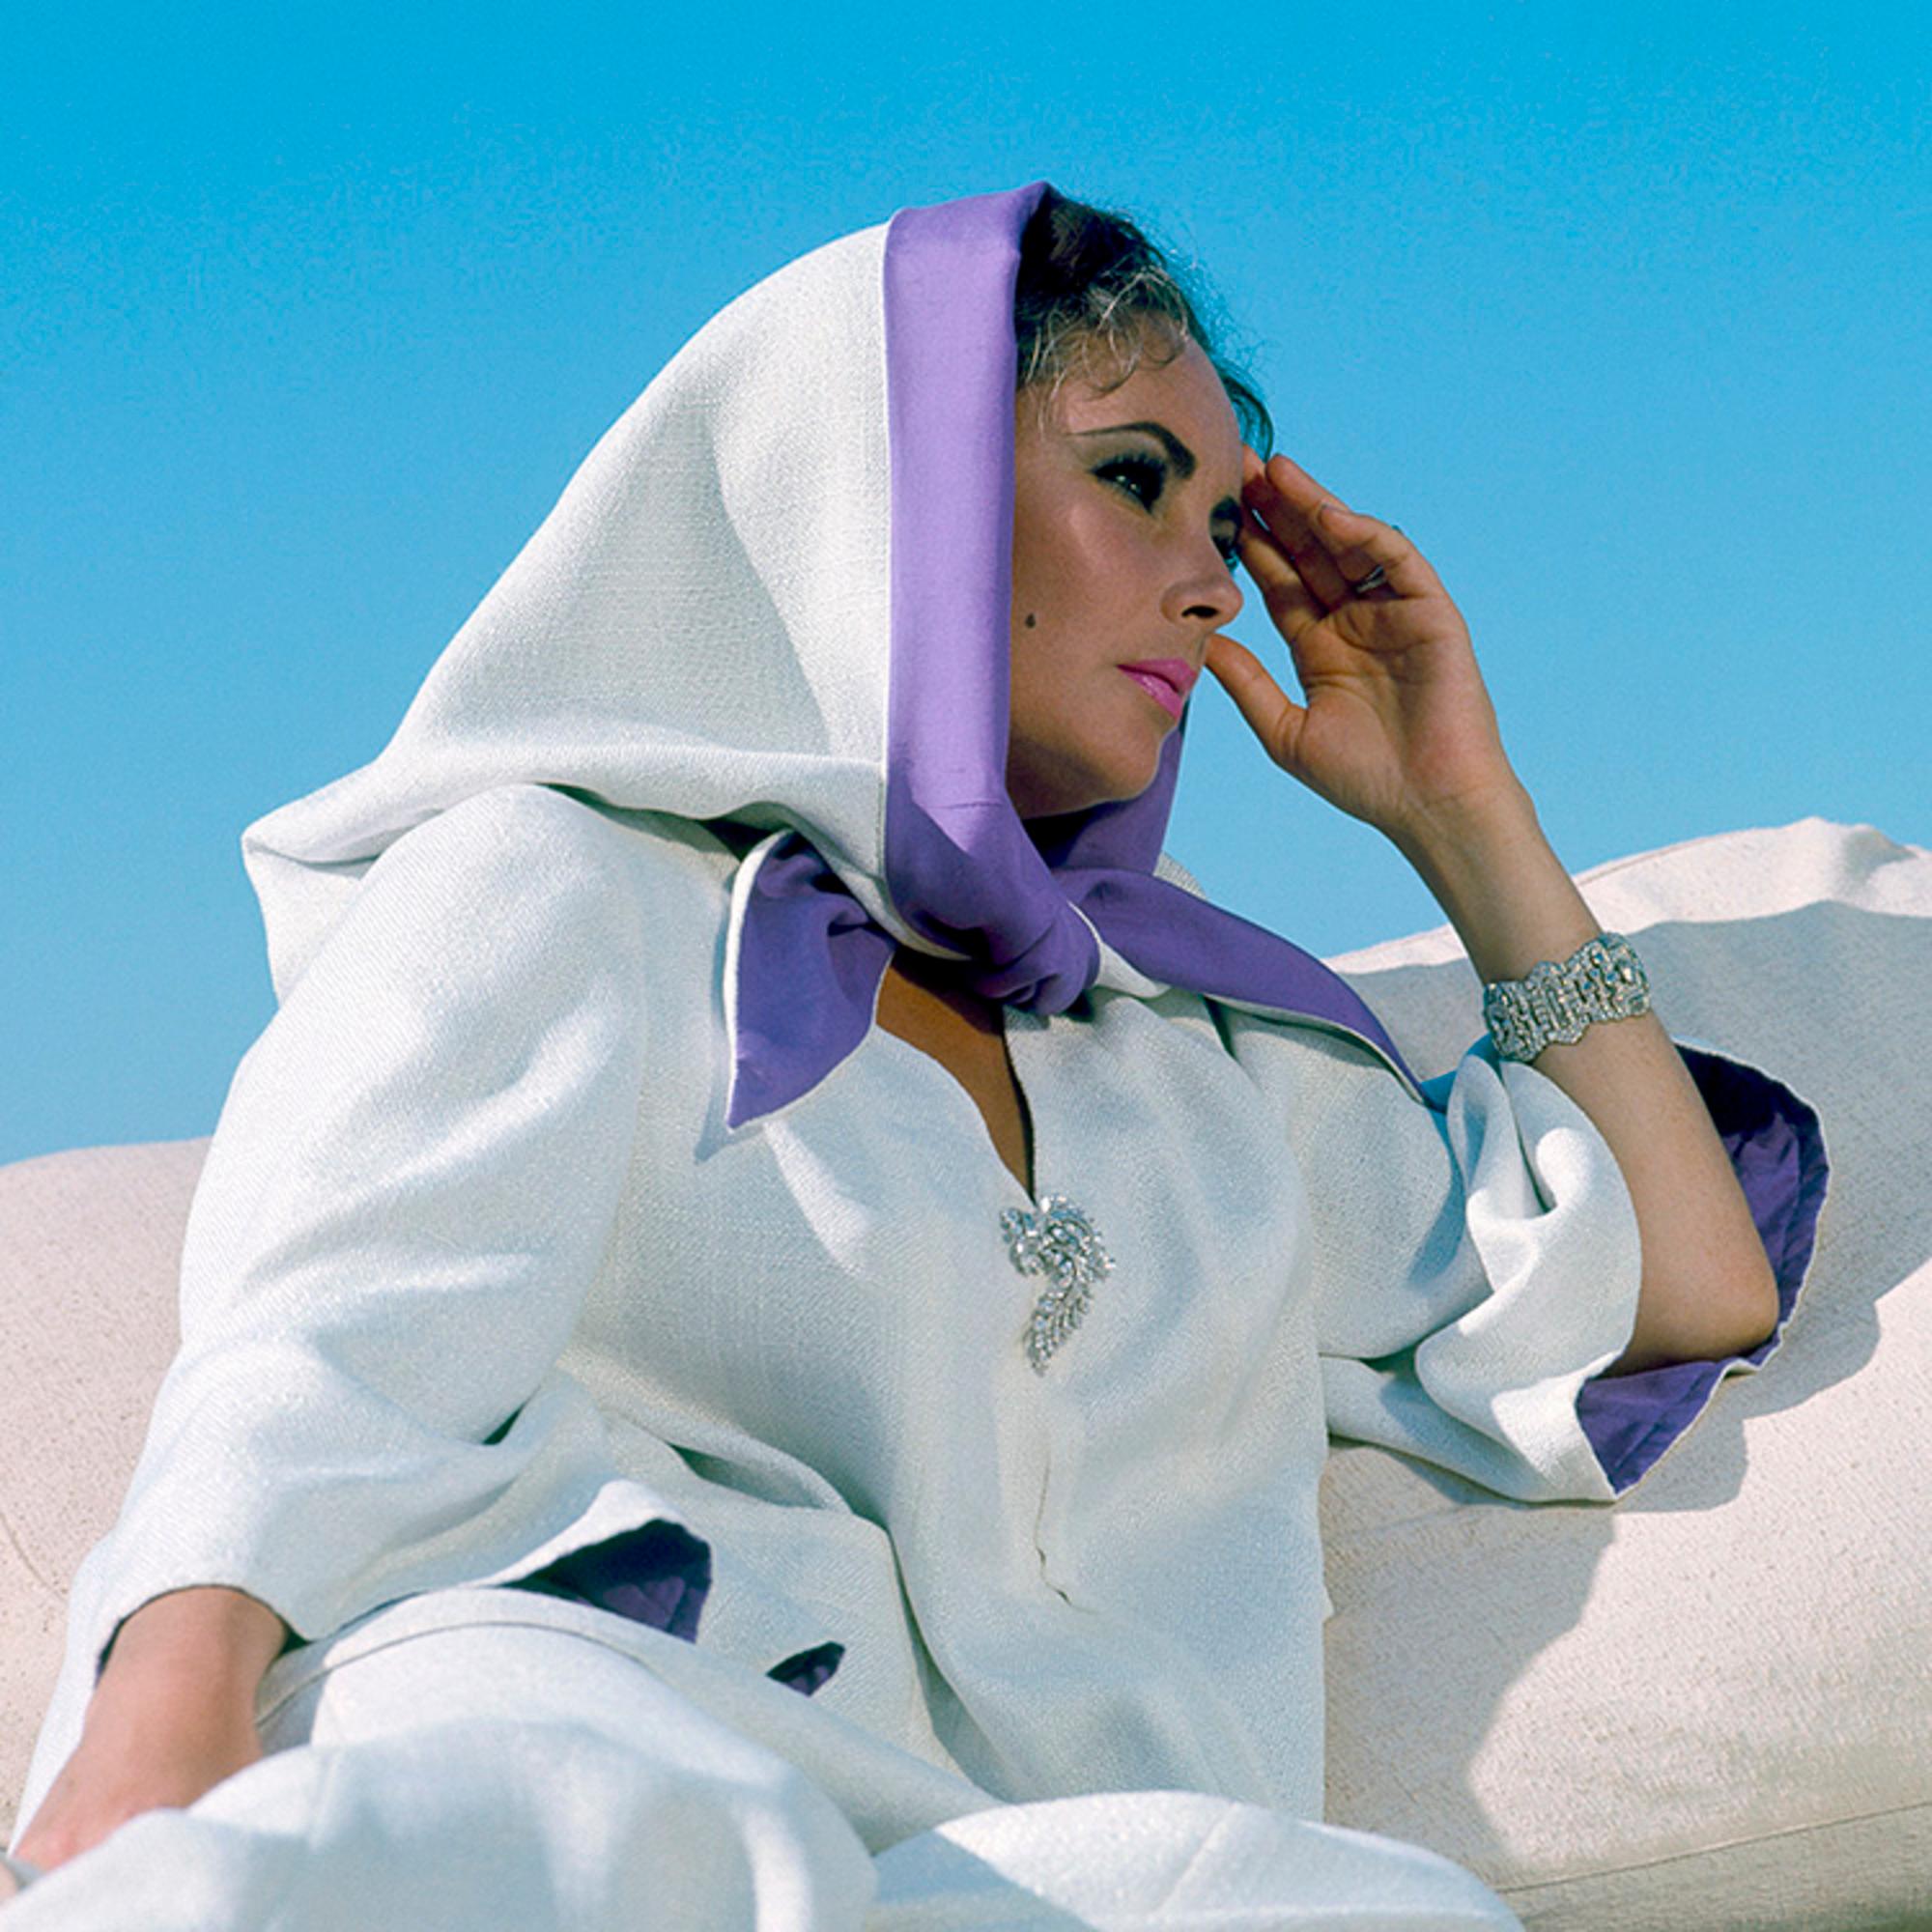 C-type print signed and numbered by Gered Mankowitz

Elizabeth Taylor photographed on set of Joseph Losey’s romantic drama film ‘Boom!’ in Sardinia, 1968.

Available Sizes:
16" x 20” Edition of 50
20" x 24” Edition of 50
30" x 40” Edition of 25
50”